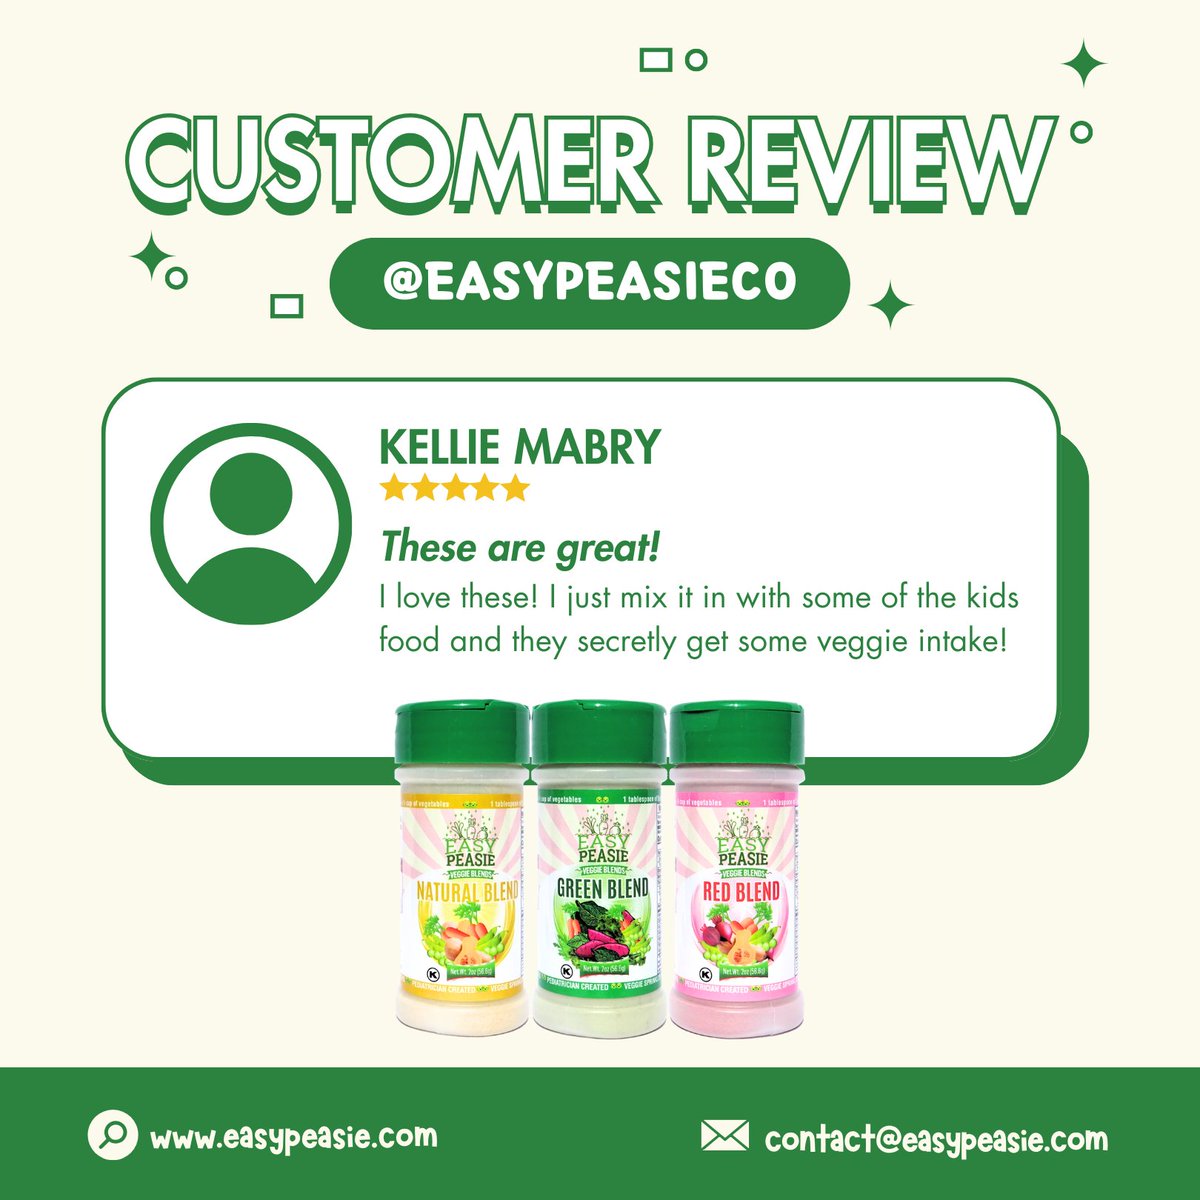 We're overjoyed to know that our product has simplified mealtime for your picky eaters. 😄🍽️ Share a review and get a chance to win a fantastic giveaway! Comment on our website (easypeasie.com) or on social media. Don't forget to tag us in your photos! #EasyPeasieFamily